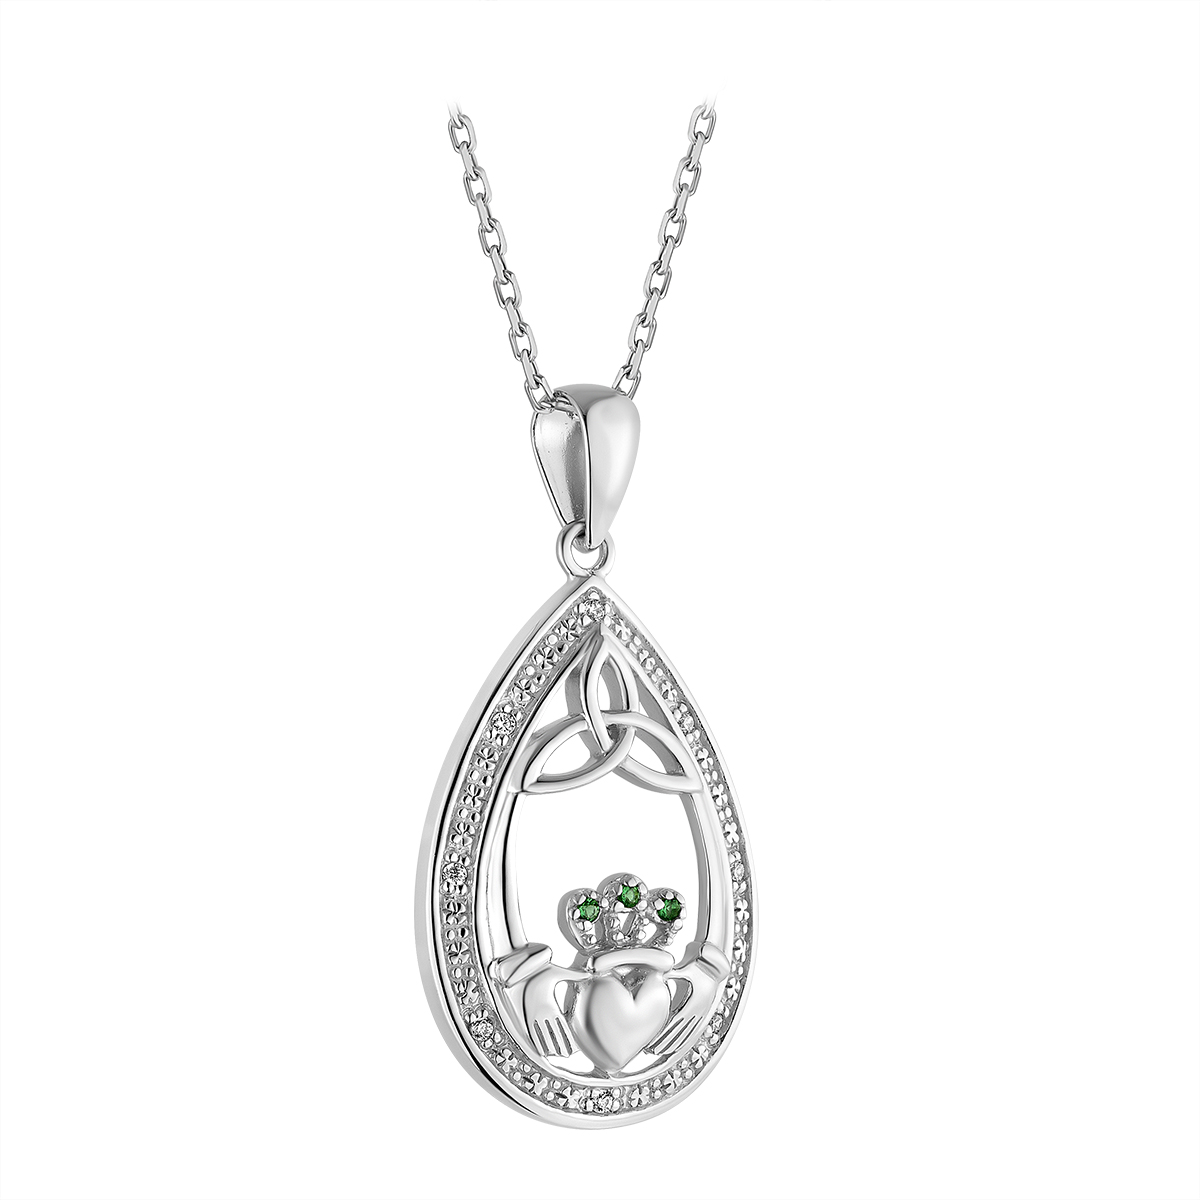 Product image for Irish Necklace | Sterling Silver Crystal Claddagh and Trinity Knot Pendant